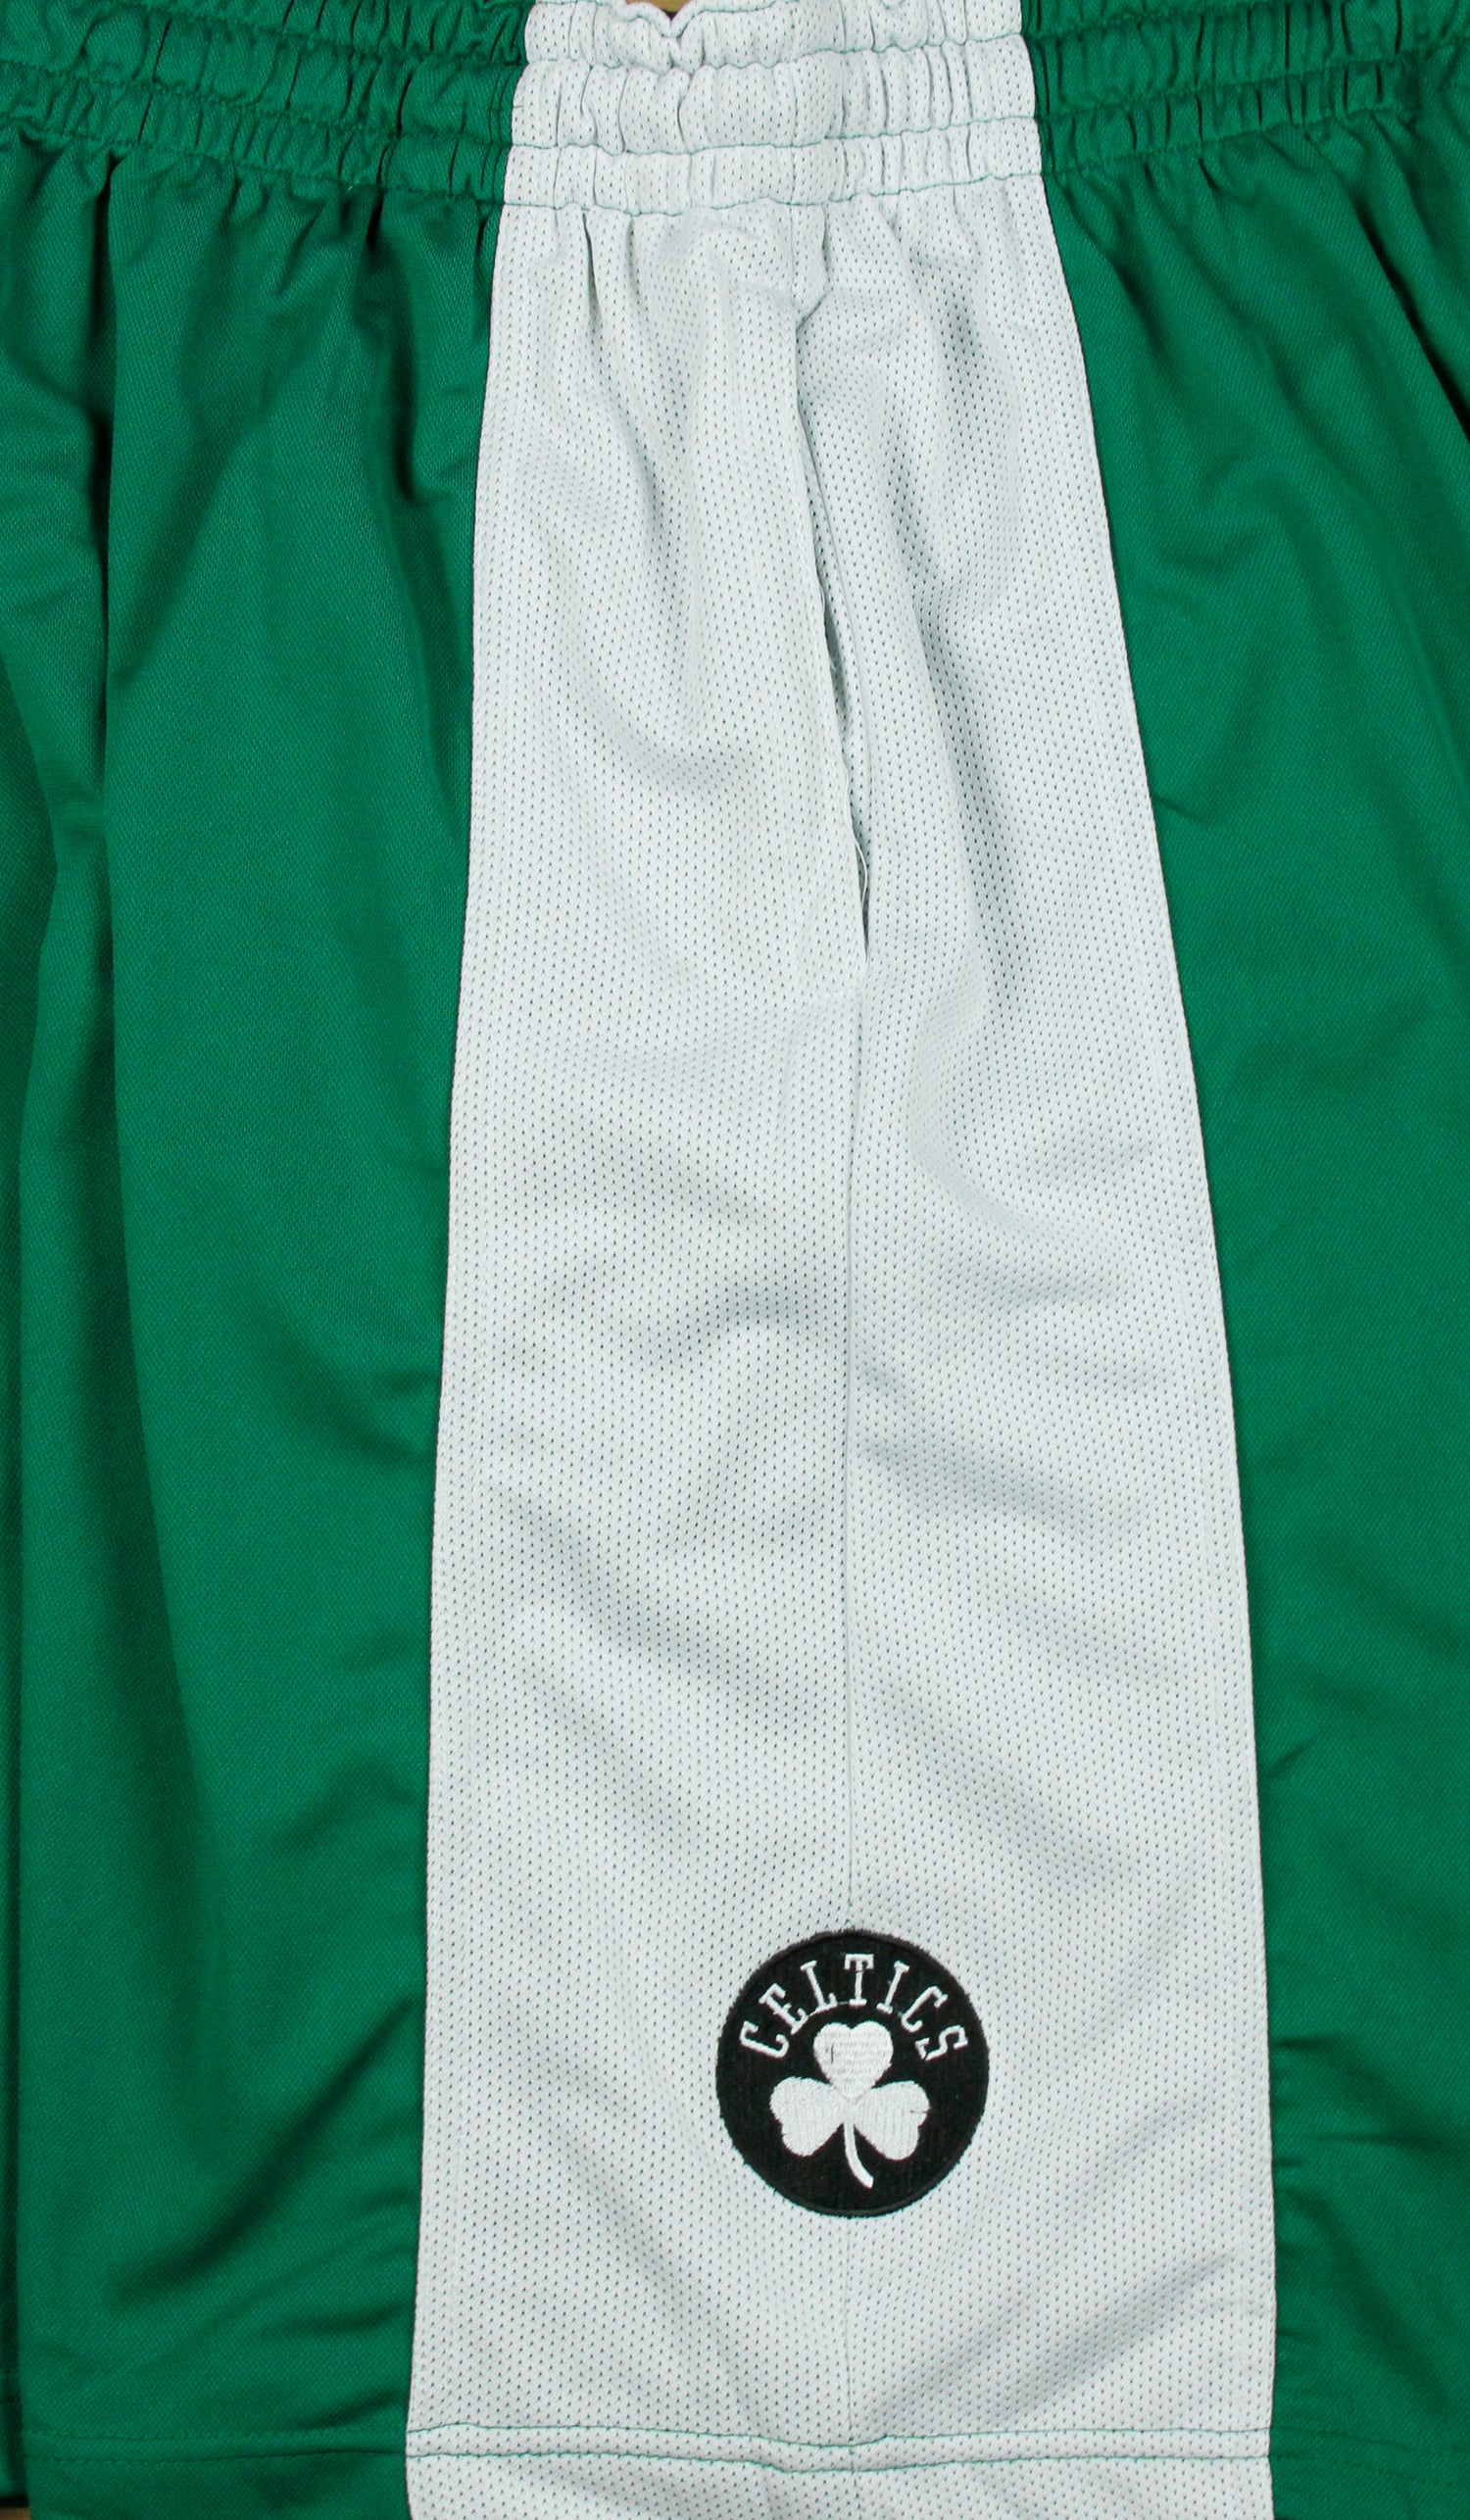 Youth Boston Celtics New Green Replica Basketball Shorts by Outer Stuff